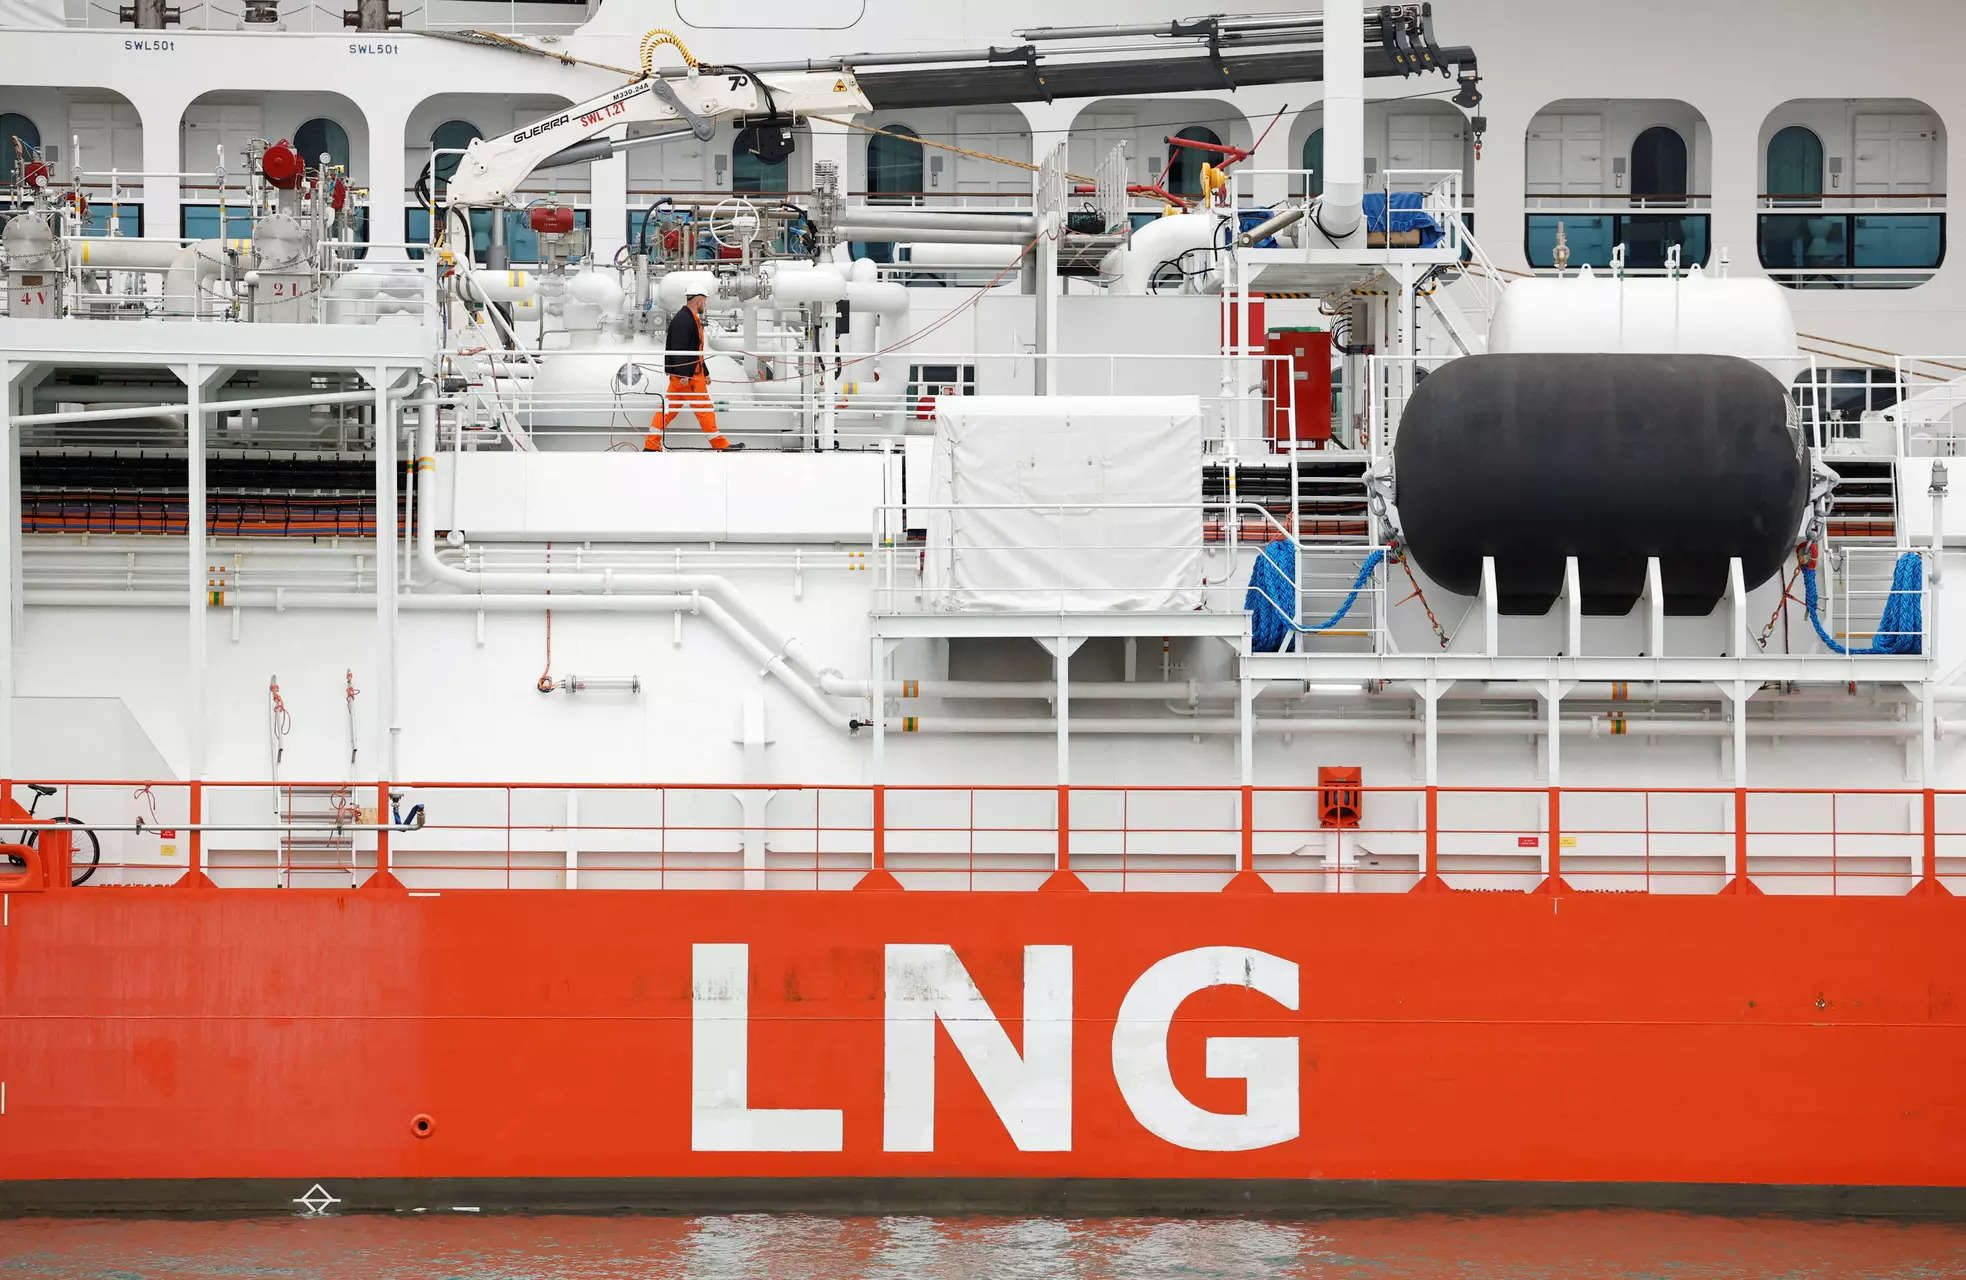 <p>LNG has higher calorific value and burns much cleaner than diesel. Using LNG results in reduction of CO2 emission by 30 %, particulate matter (PM) by 80 %, and SOx by 100 %.</p>